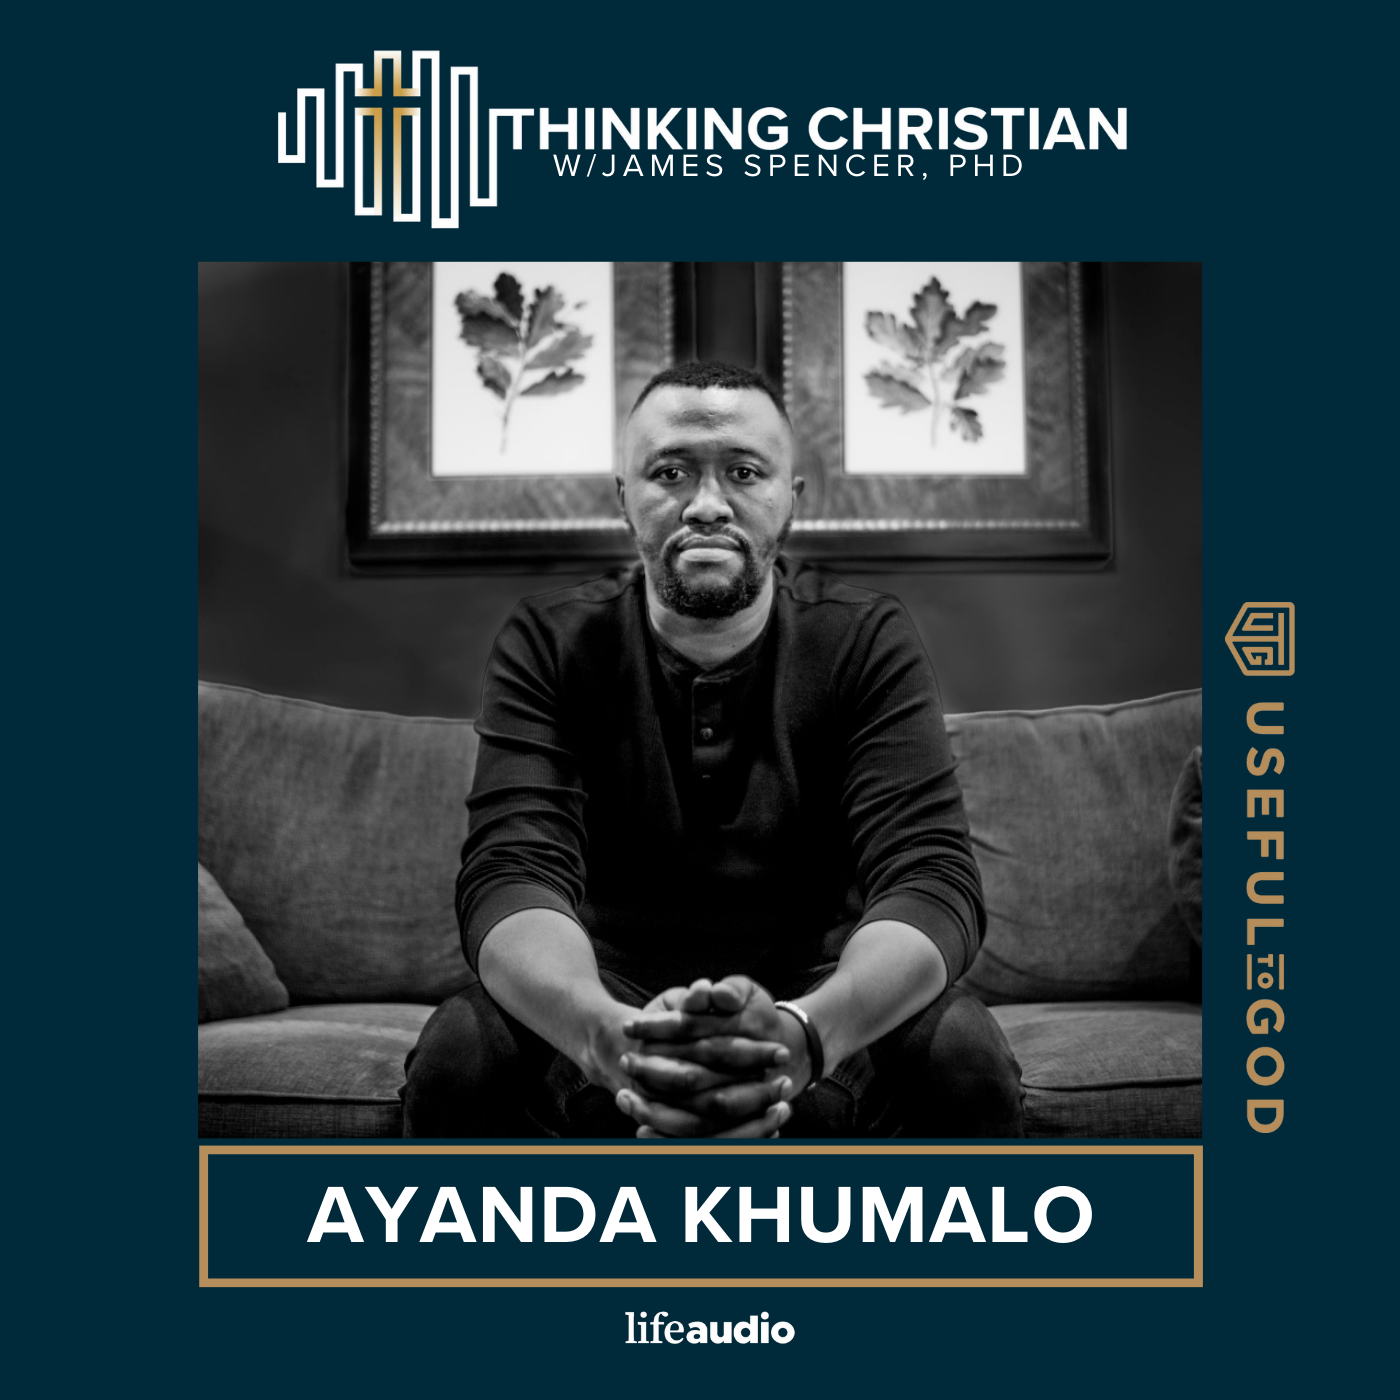 How Should Christians Think about Worship? A Conversation with Ayanda Khumalo, Part 2